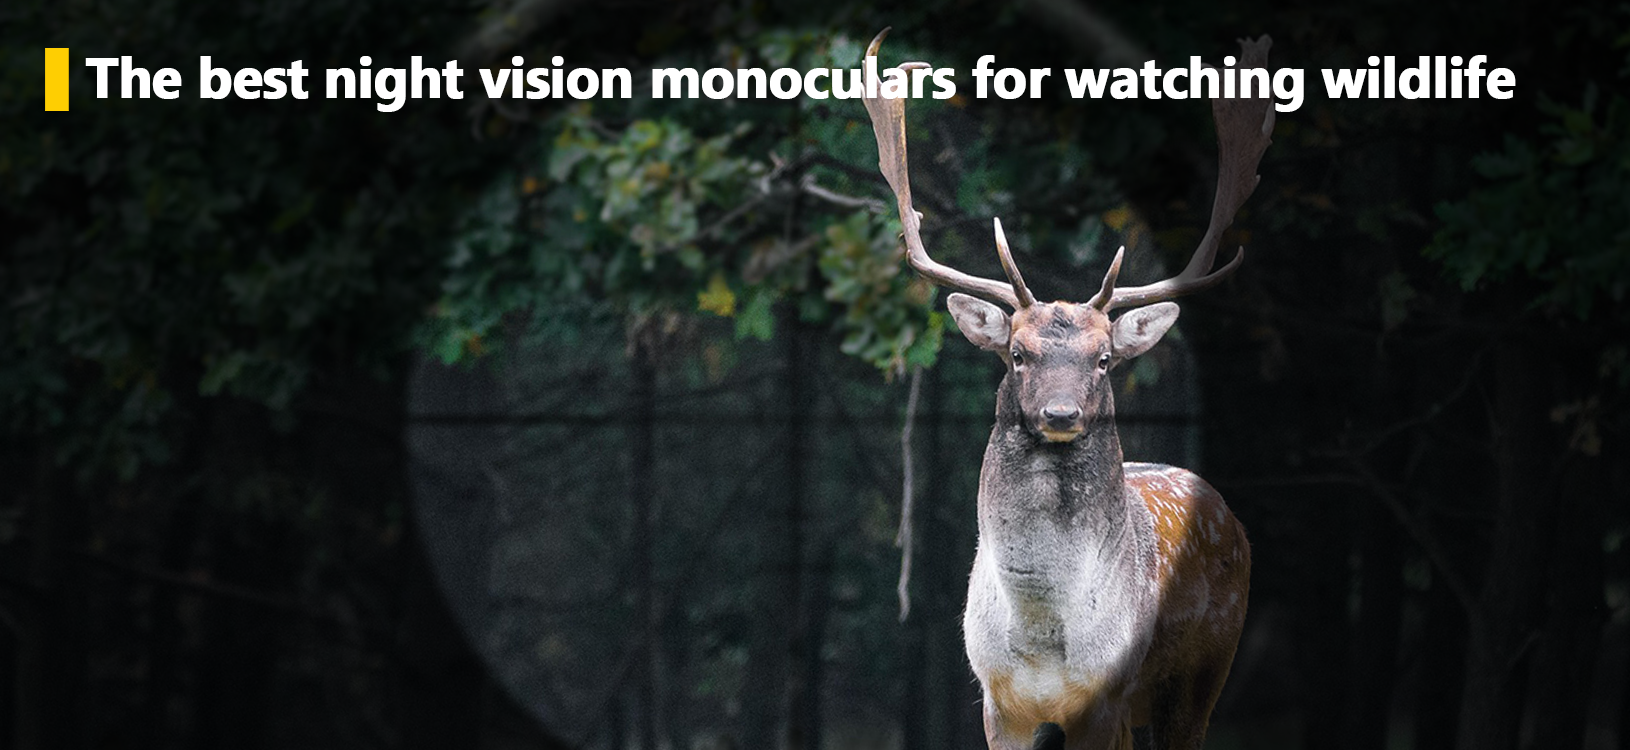 The best night vision monoculars for watching wildlife